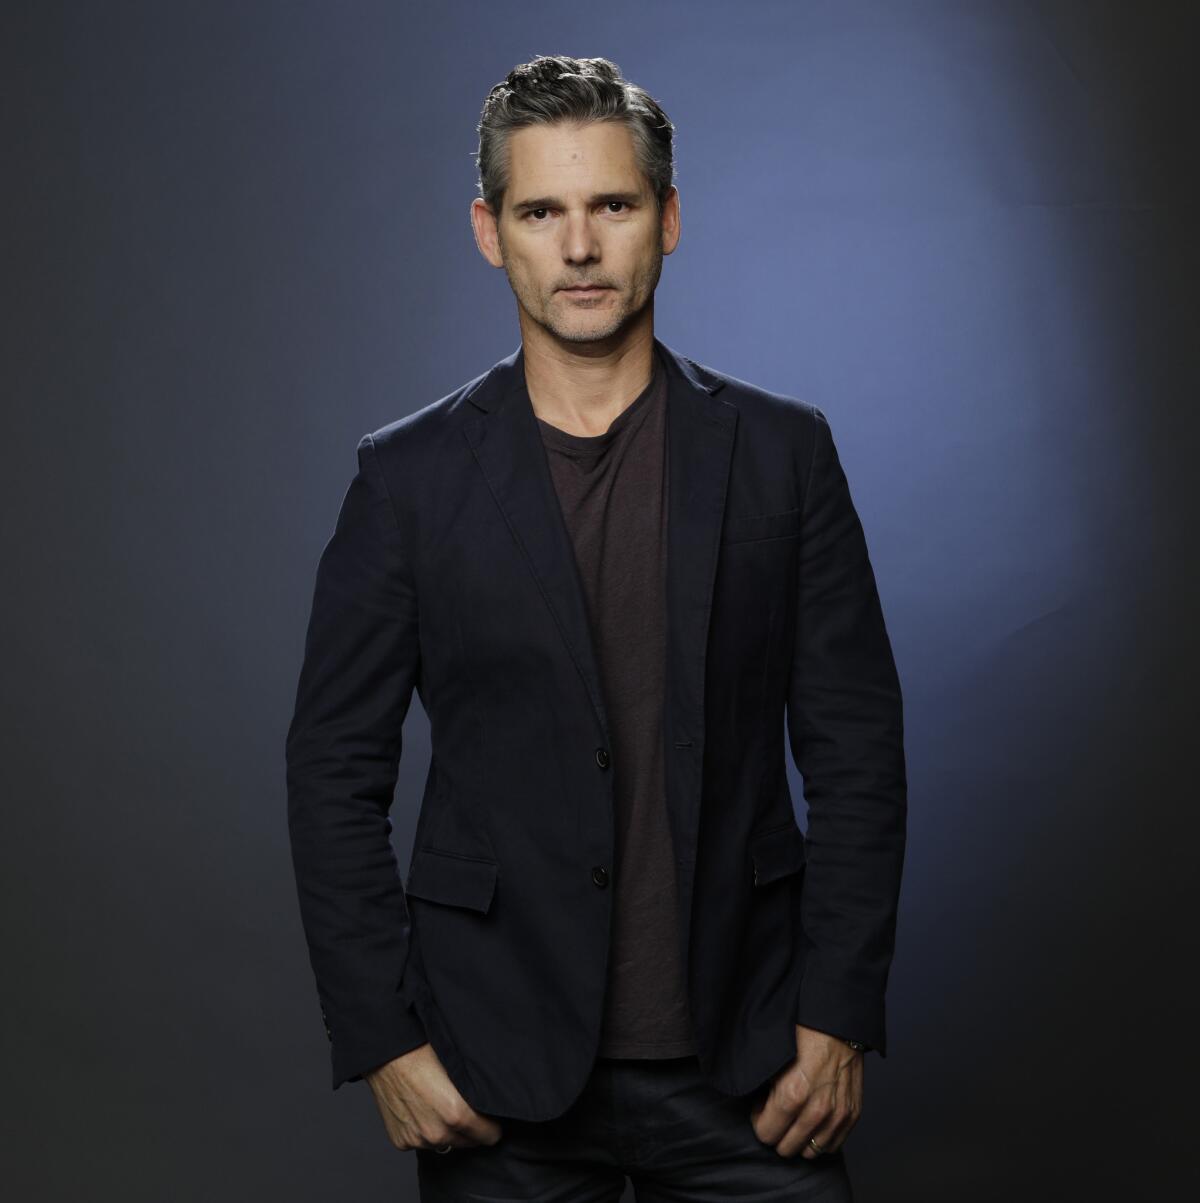 Eric Bana of "Dirty John" is photographed at the Los Angeles Times studio for an Emmy Contender chat series.